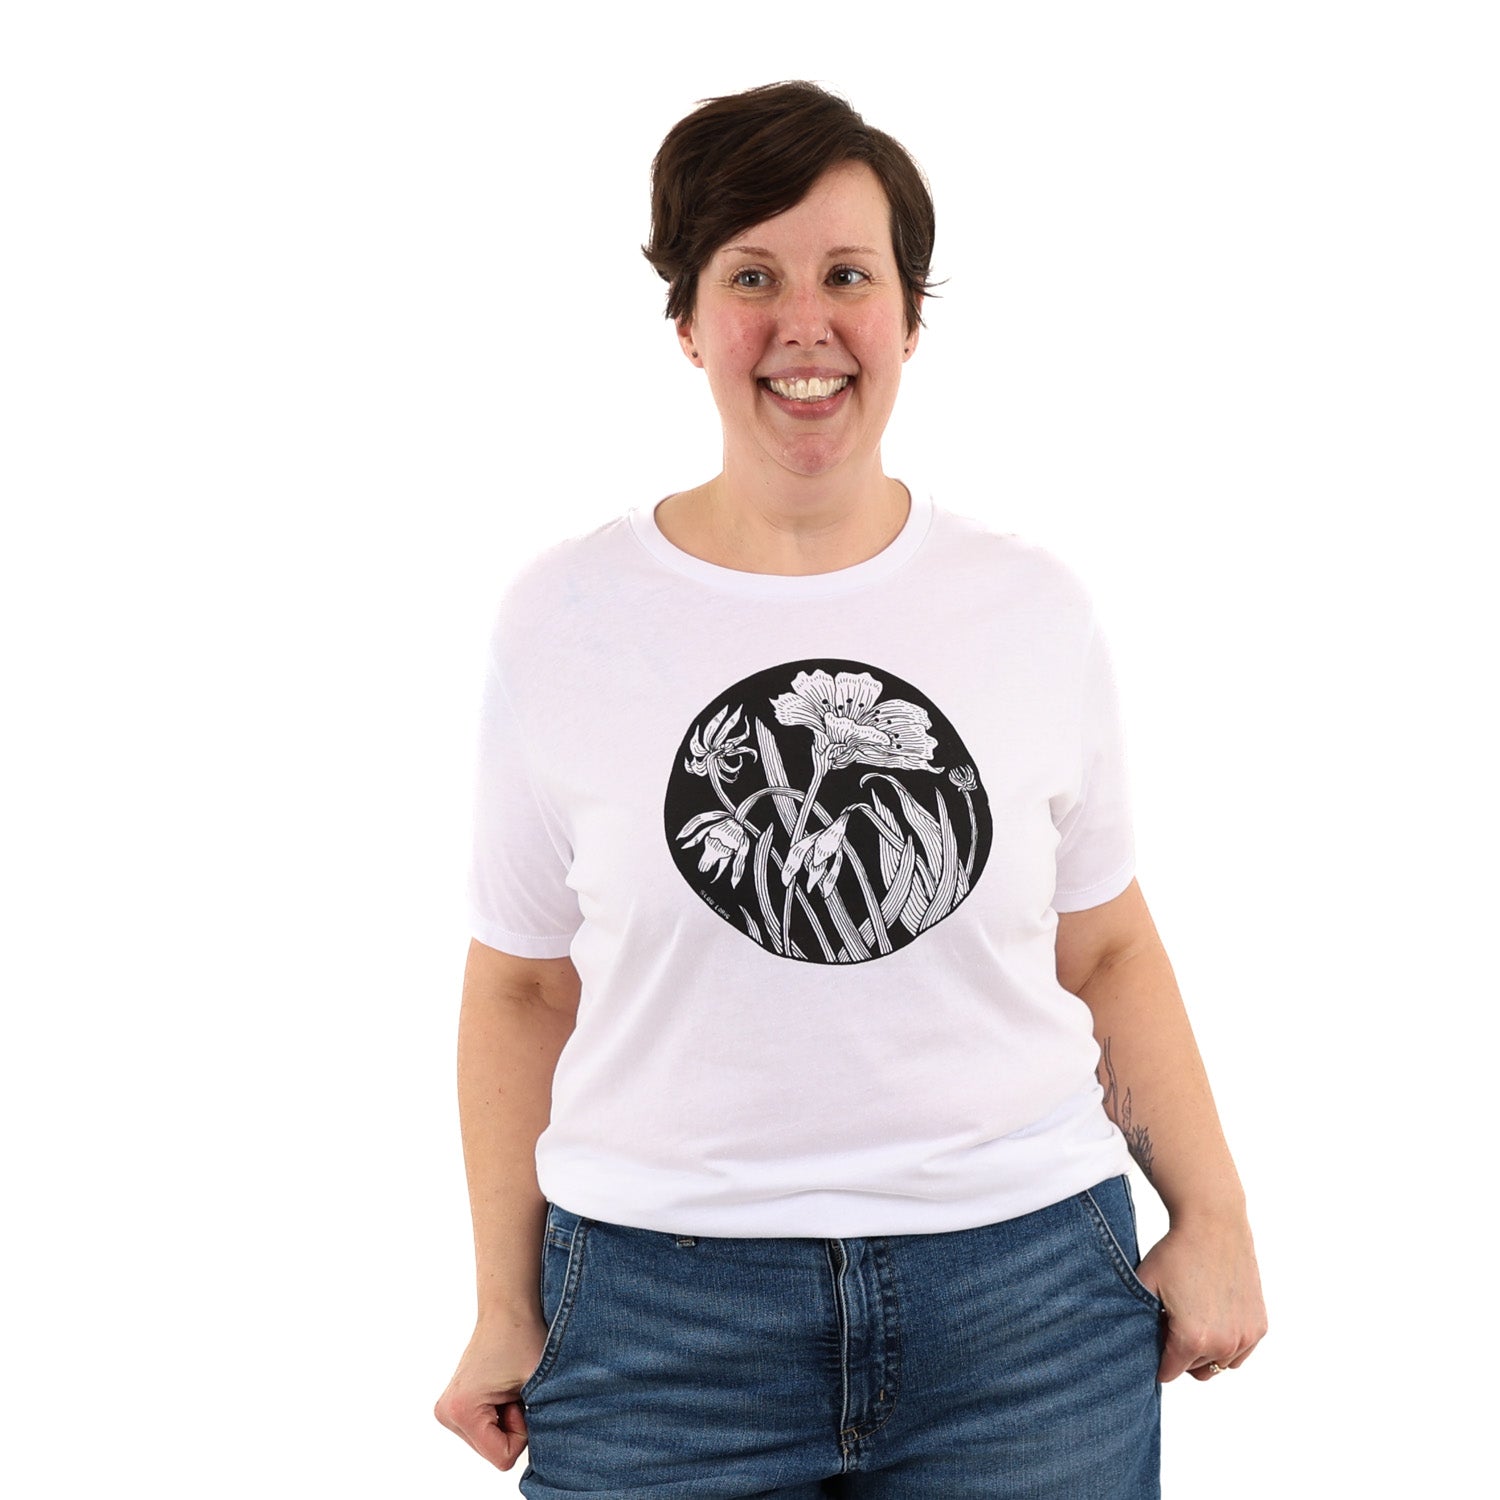 woman wearing white t shirt with black ink of an evening star t shirt.